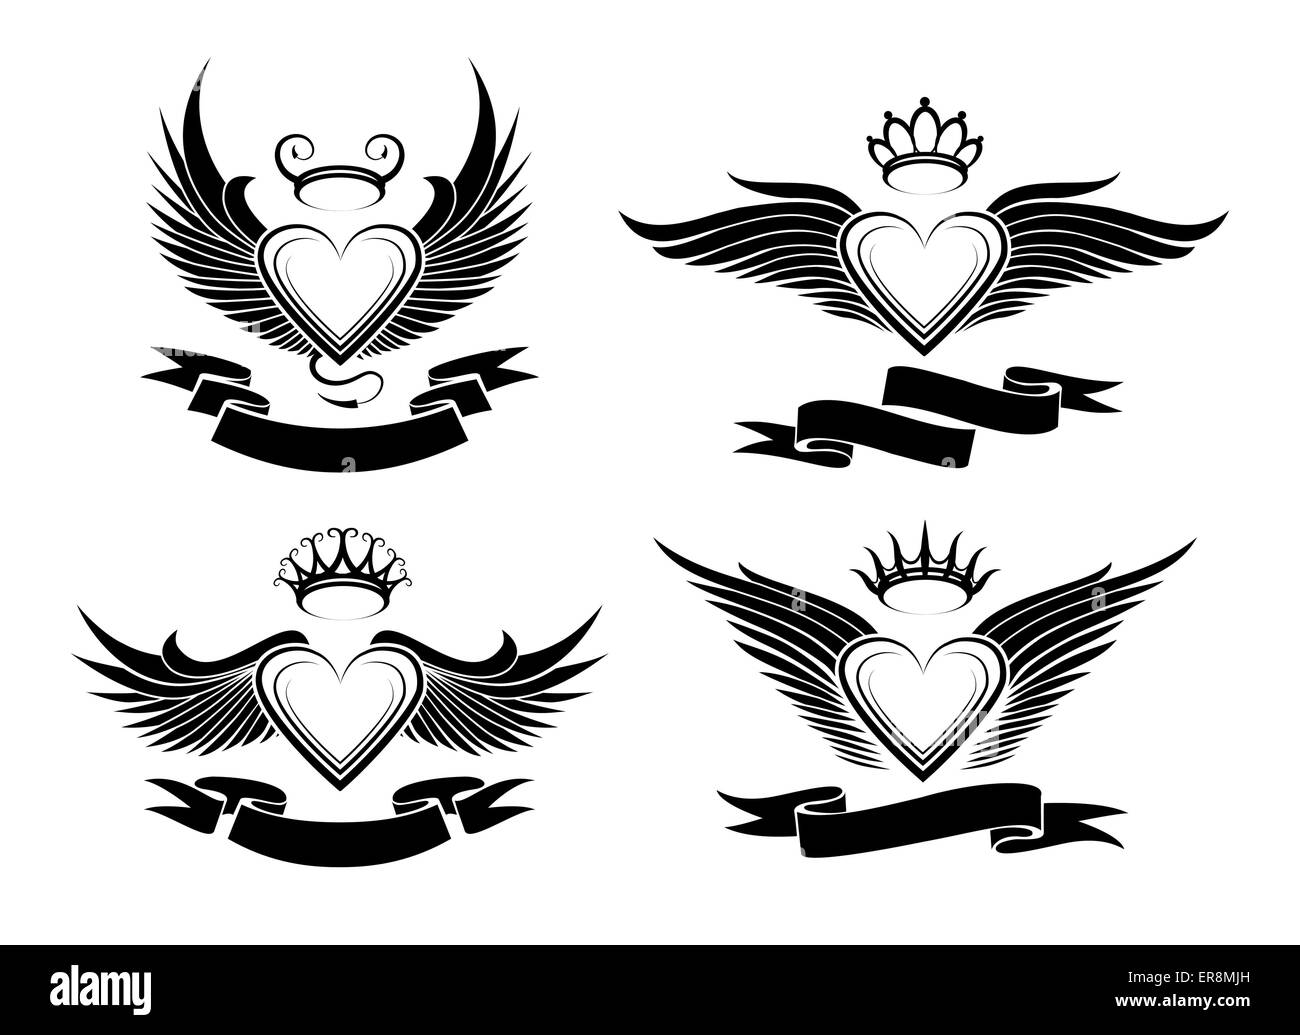 Tribal Heart With Wings